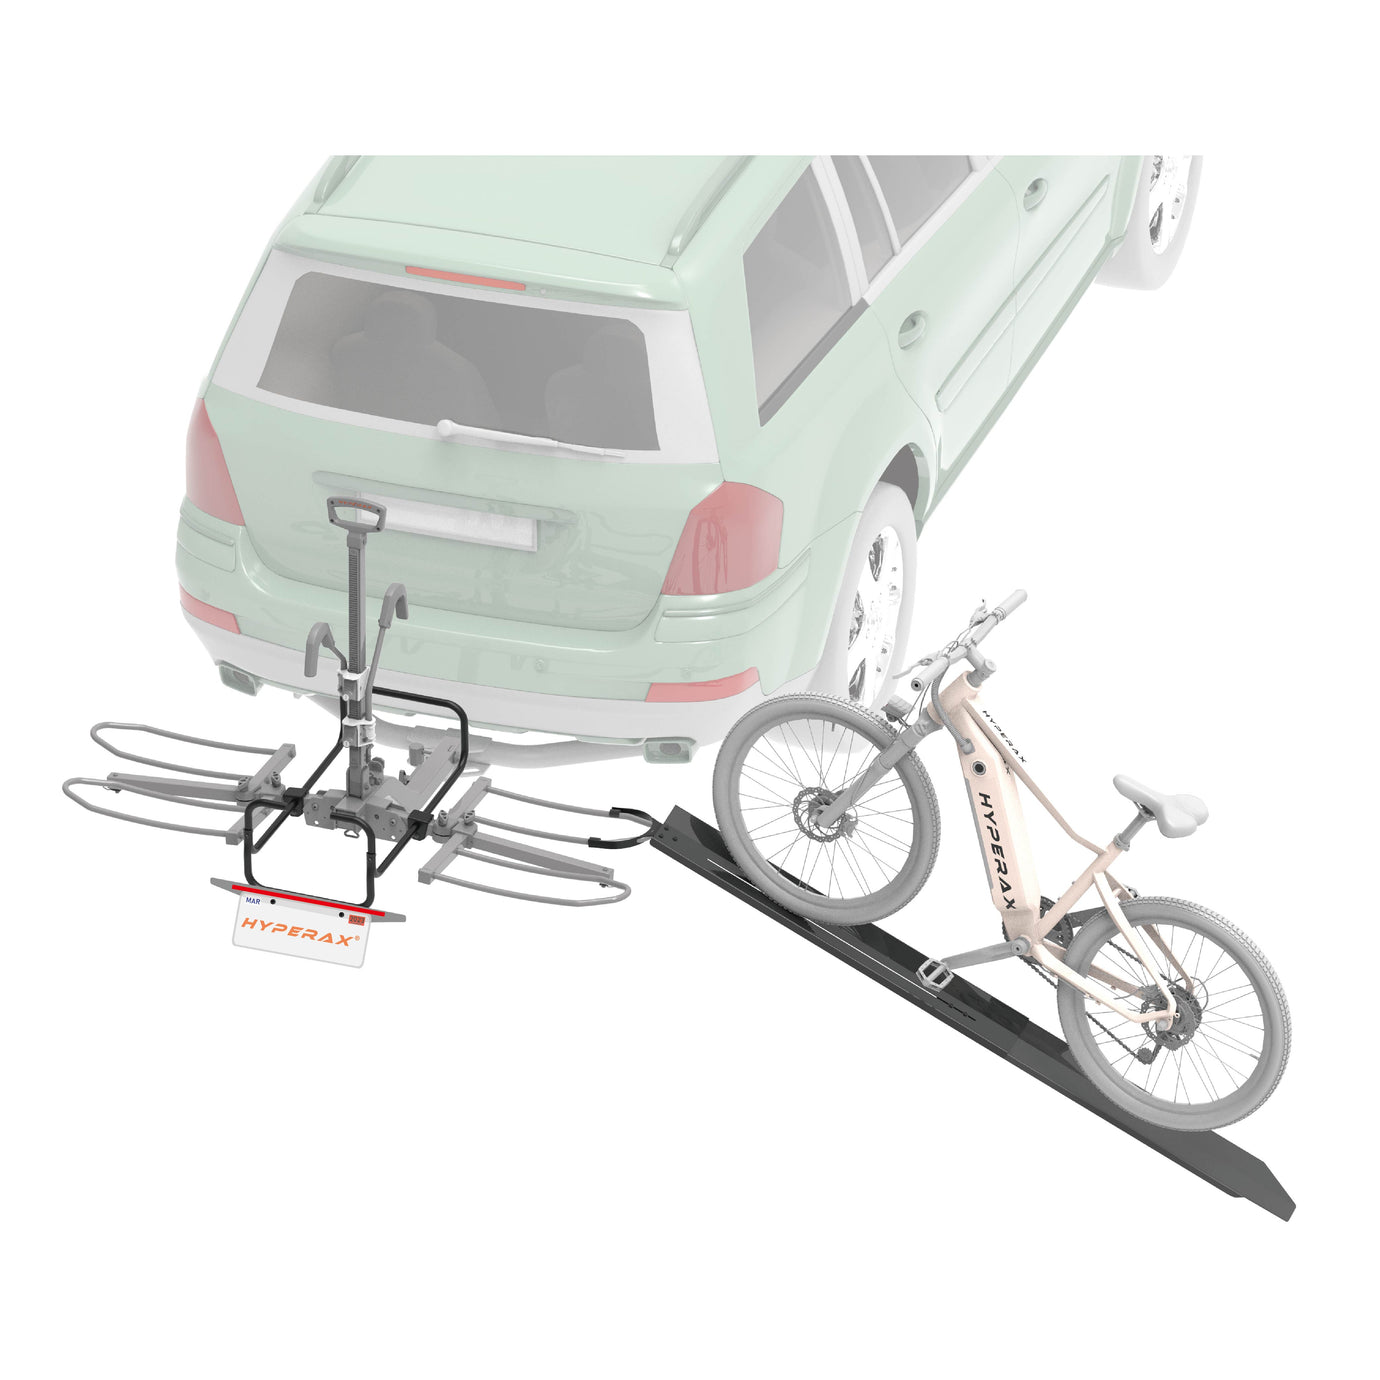 E-Bike Ramp with License Plate Holder